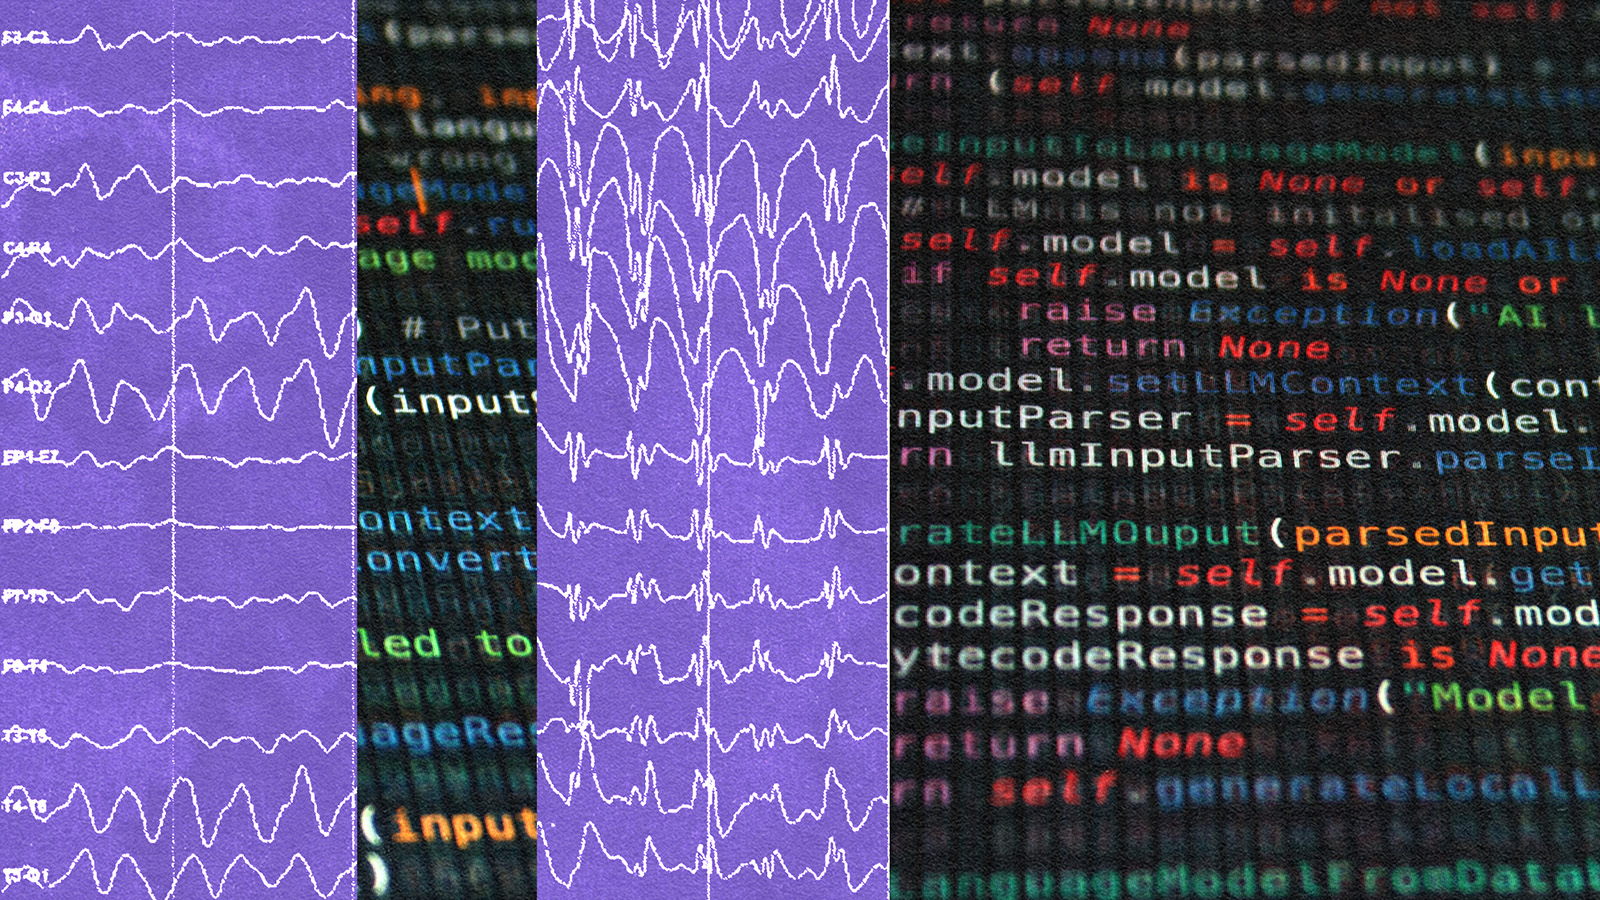 An image shows three panels of brainwave patterns on the left, with colorful lines of computer code on the right.